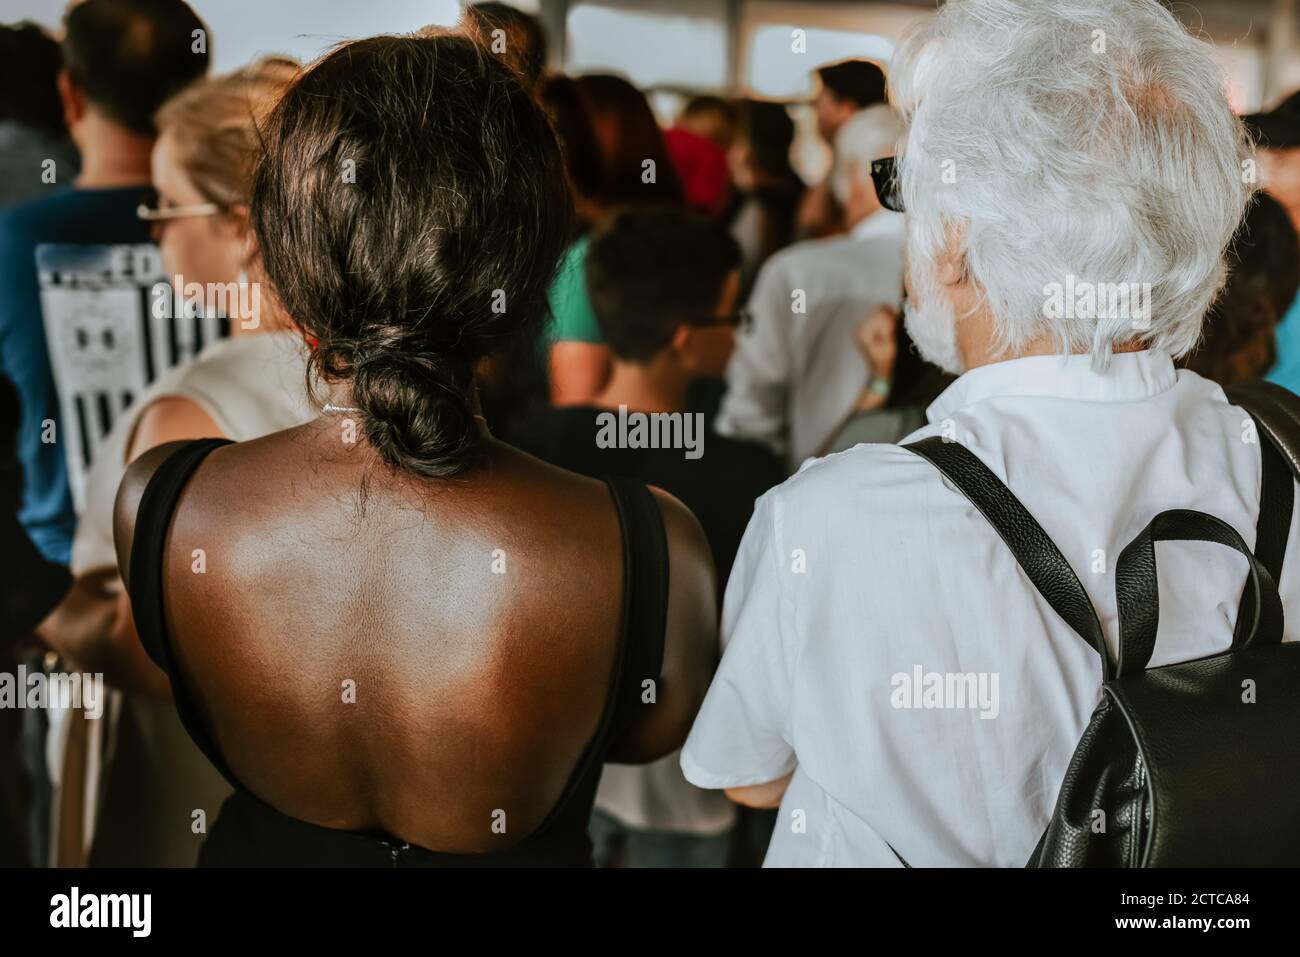 African Americans with Caucasians together. old european man stands next to a african woman Stock Photo